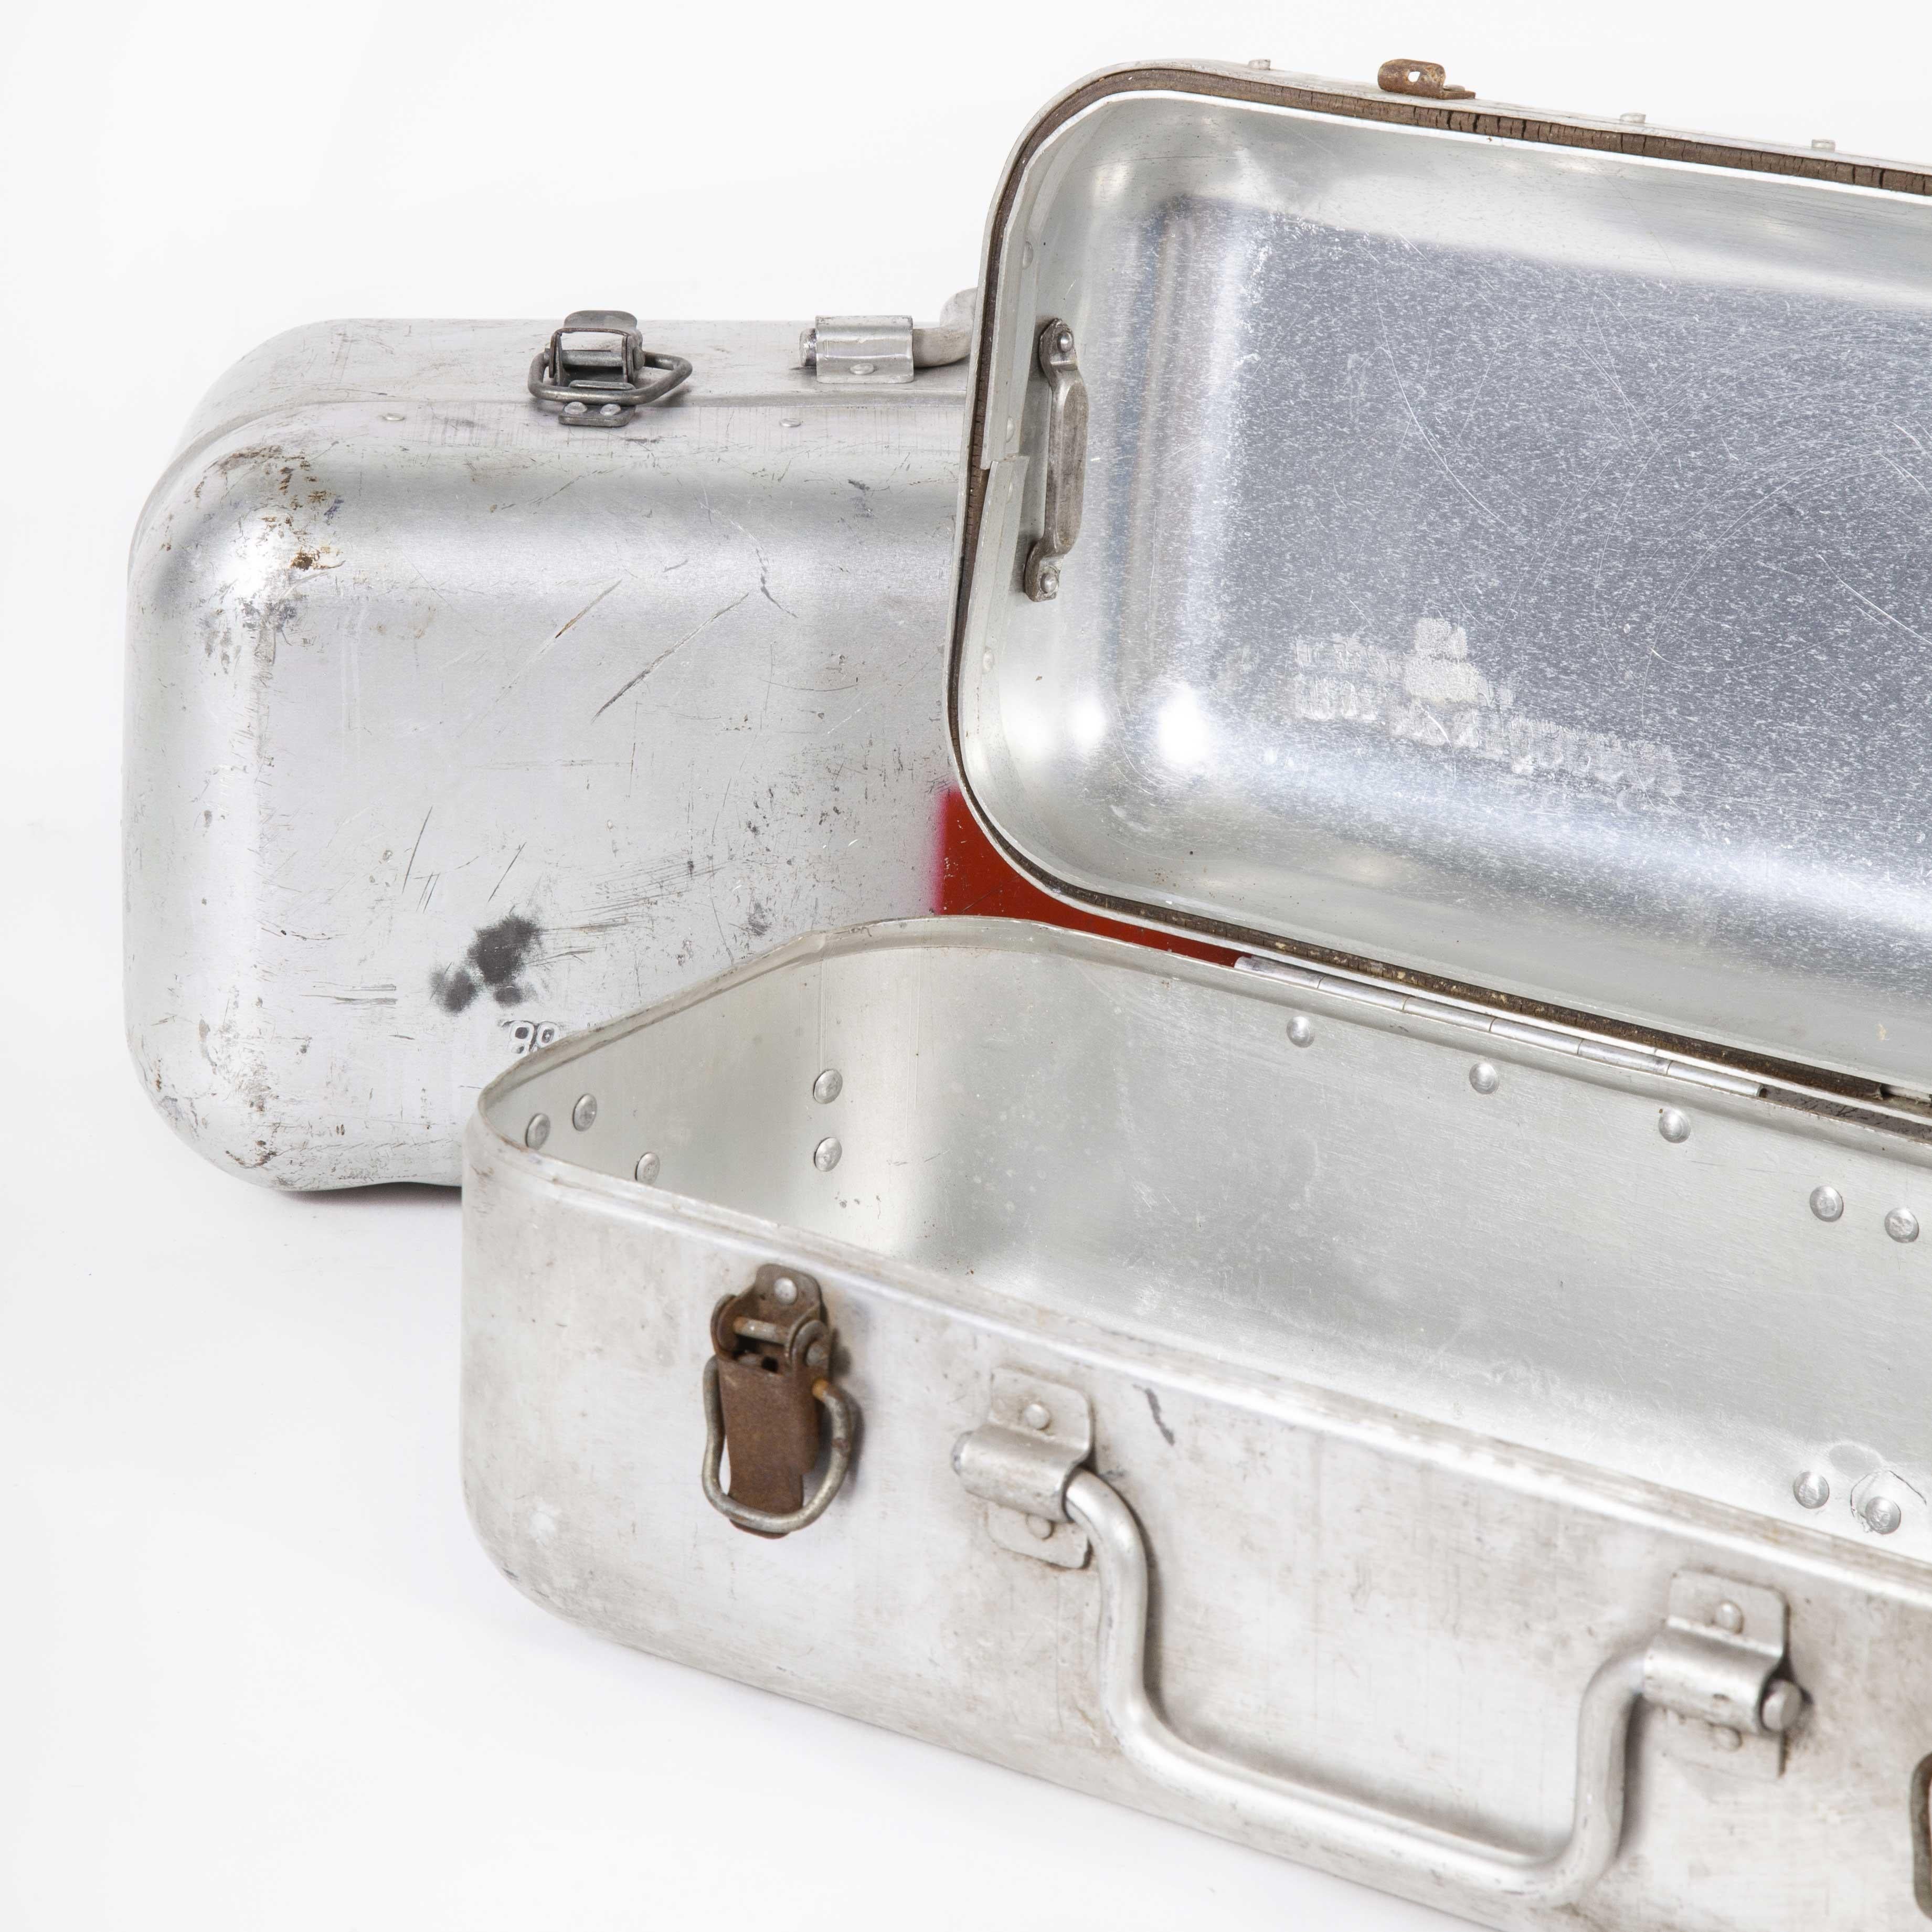 1960s Aluminium Red Cross Survival Rations Box In Good Condition For Sale In Hook, Hampshire